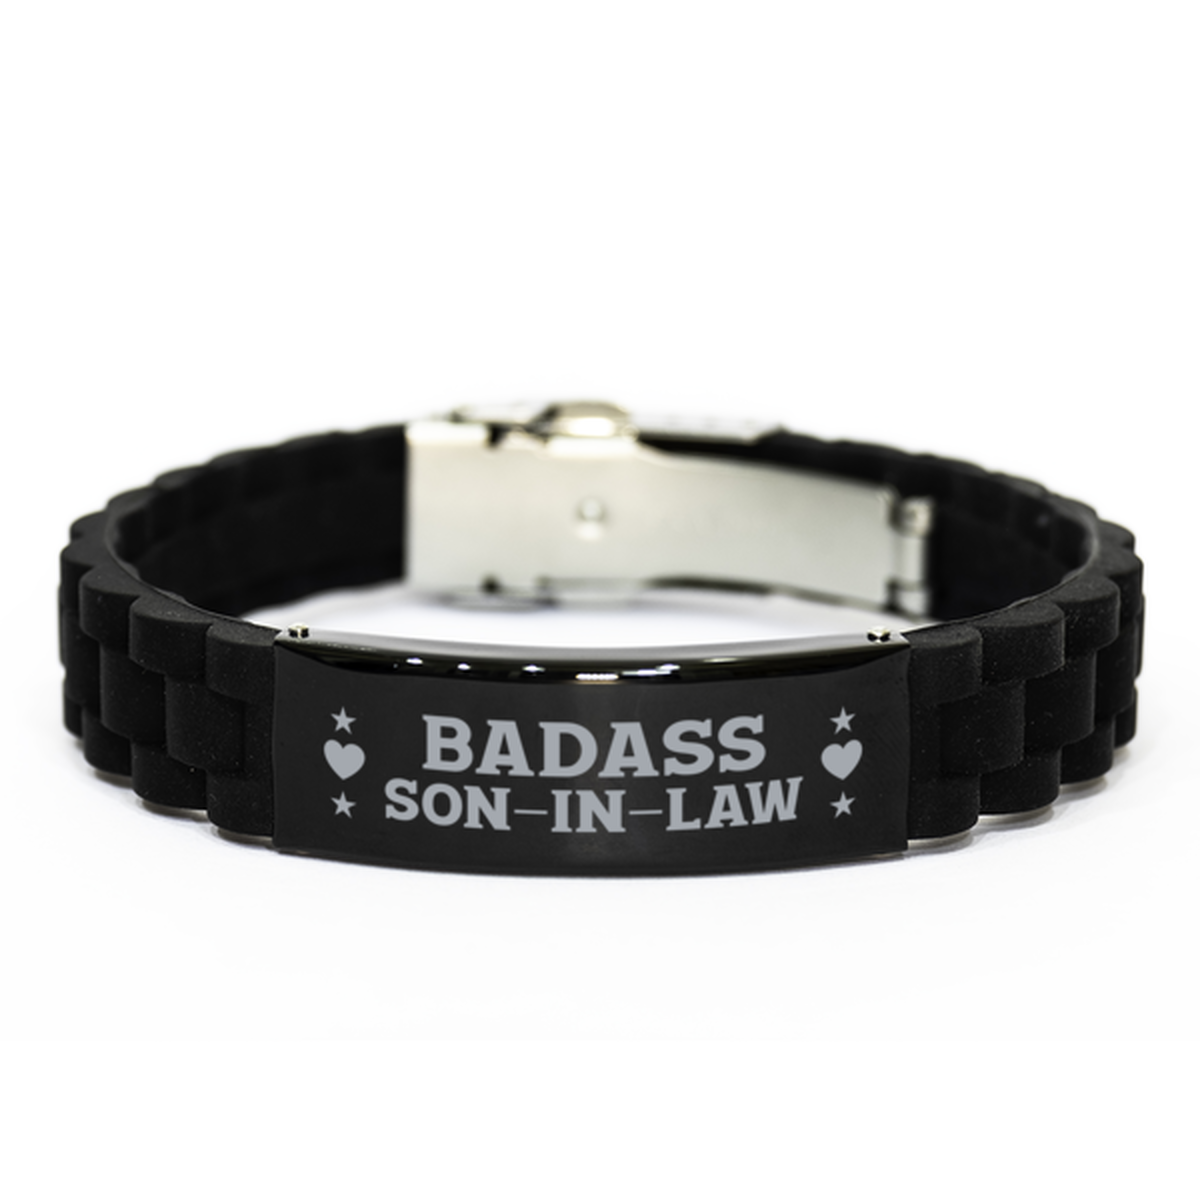 Son-in-law Black Bracelet, Badass Son-in-law, Funny Family Gifts For Son-in-law From Dad Mom